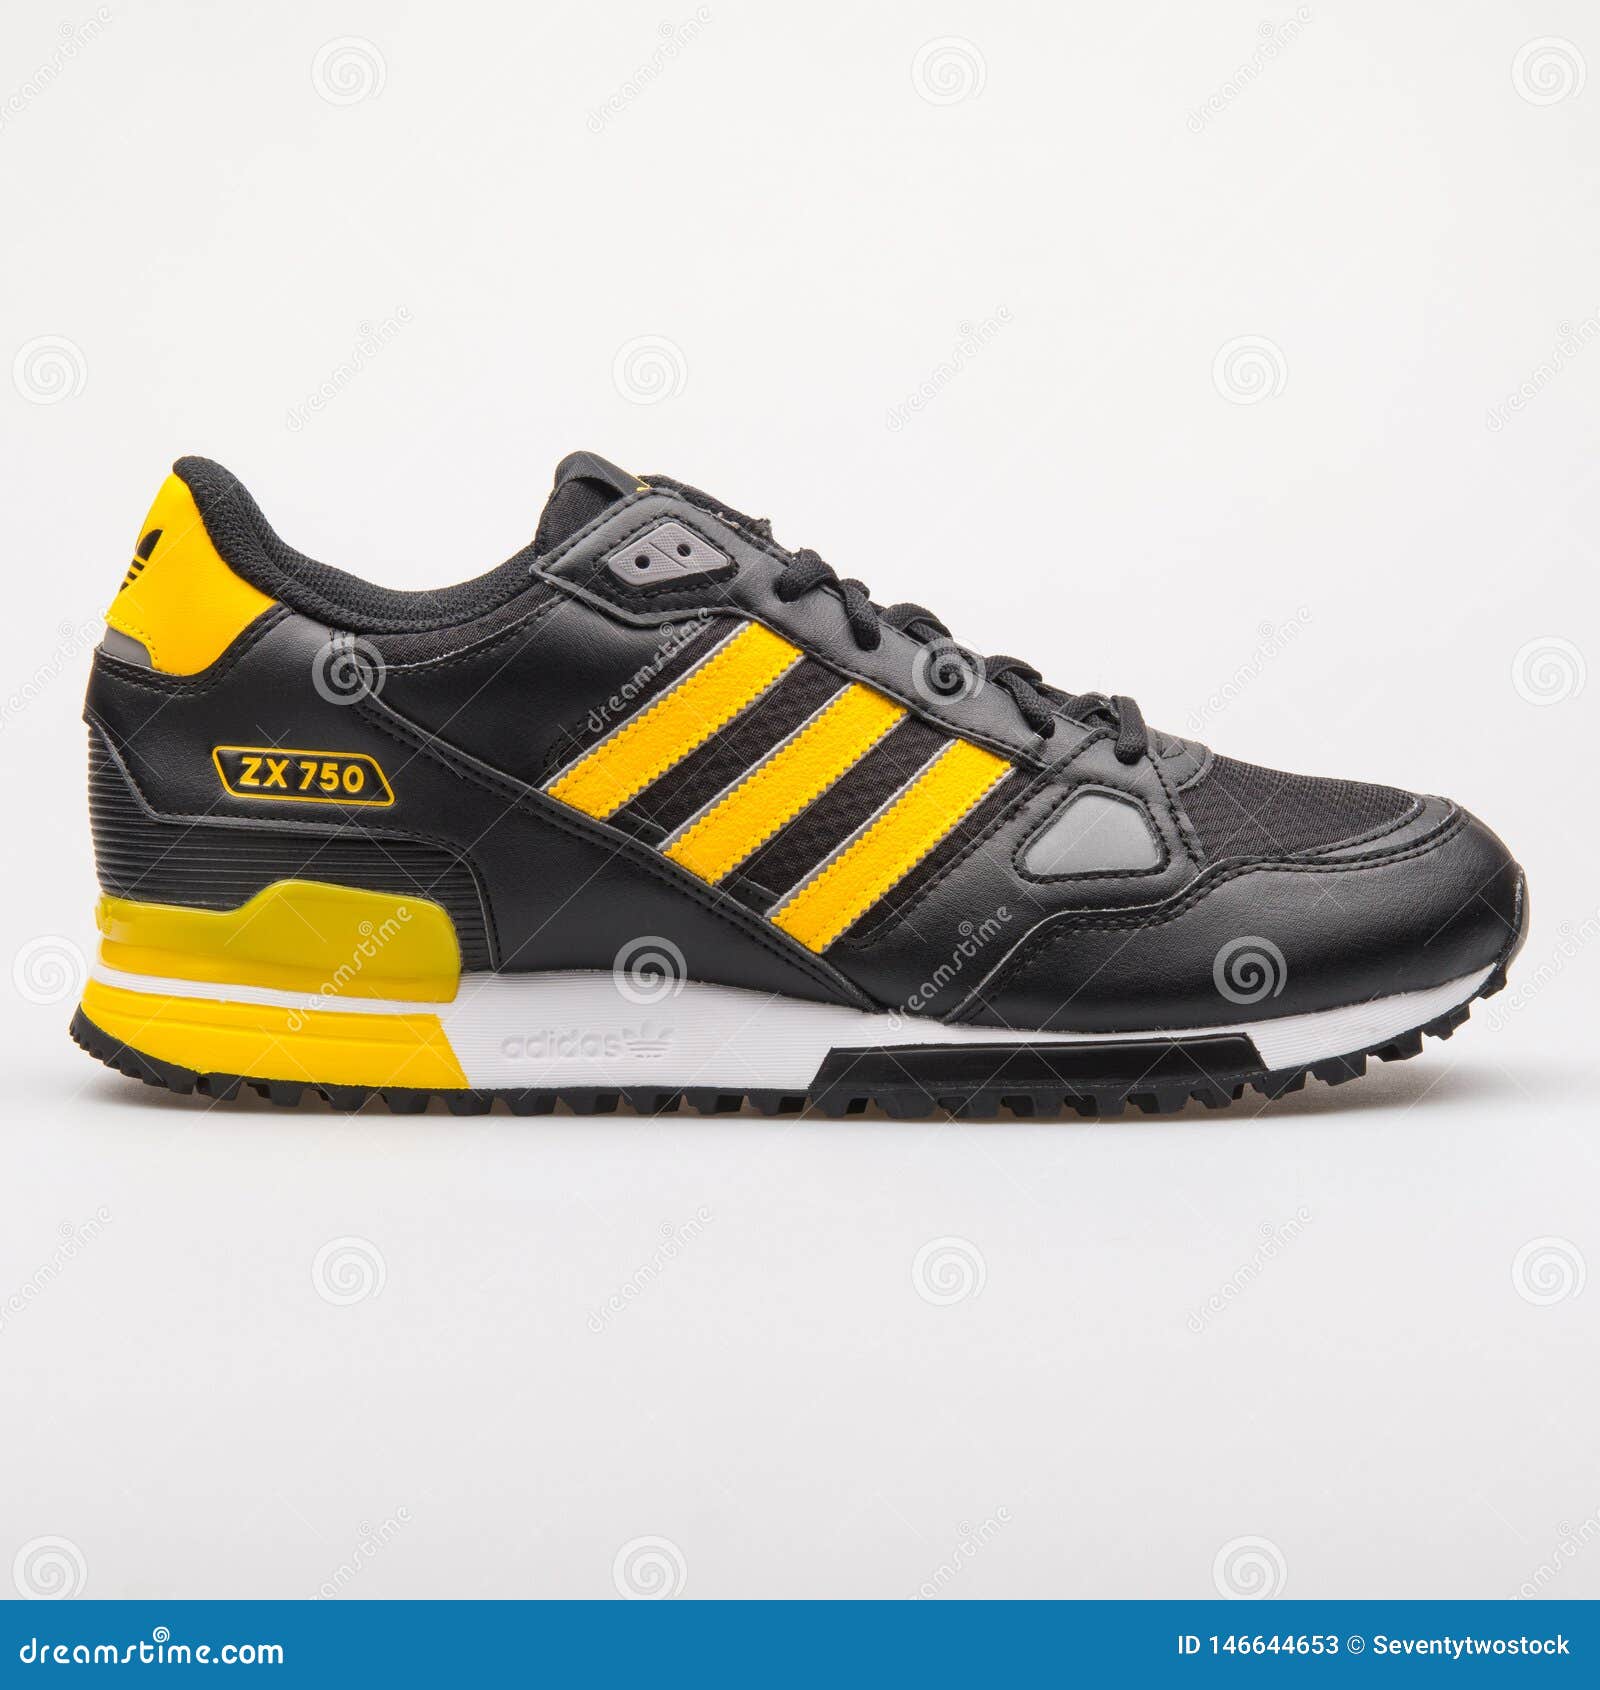 ZX 750 Black and Yellow Sneaker Editorial Stock Photo - of mens, sole: 146644653